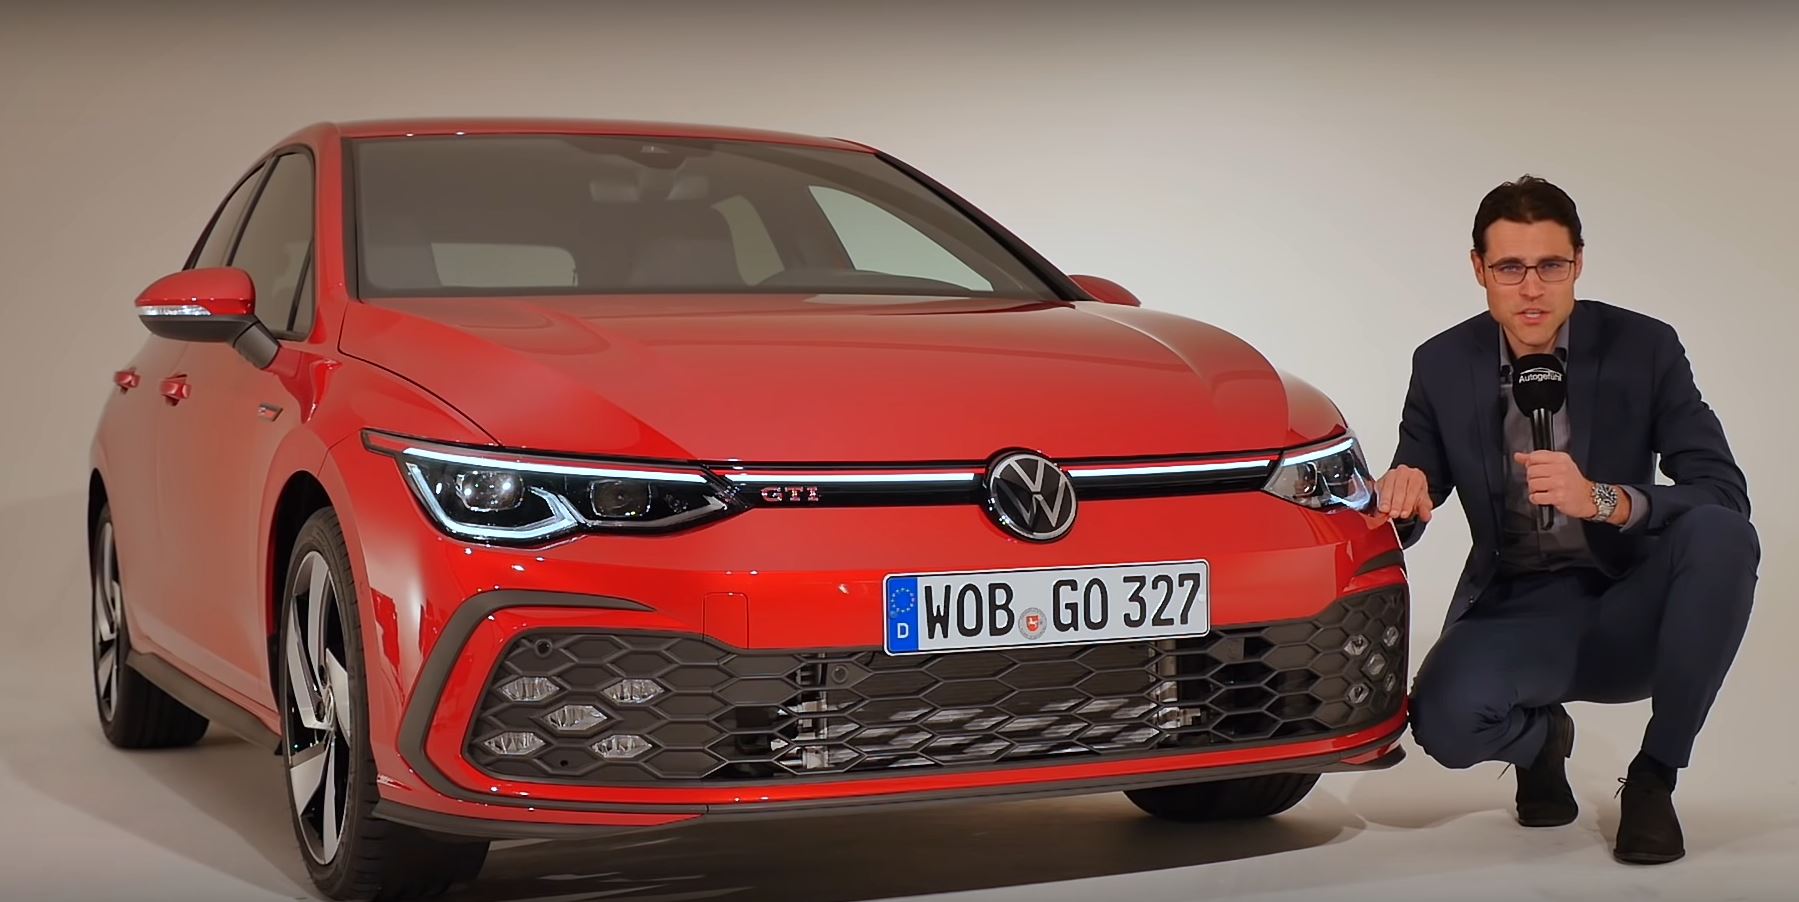 https://s1.cdn.autoevolution.com/images/news/2021-volkswagen-golf-8-gti-here-are-the-first-videos-141487_1.jpg